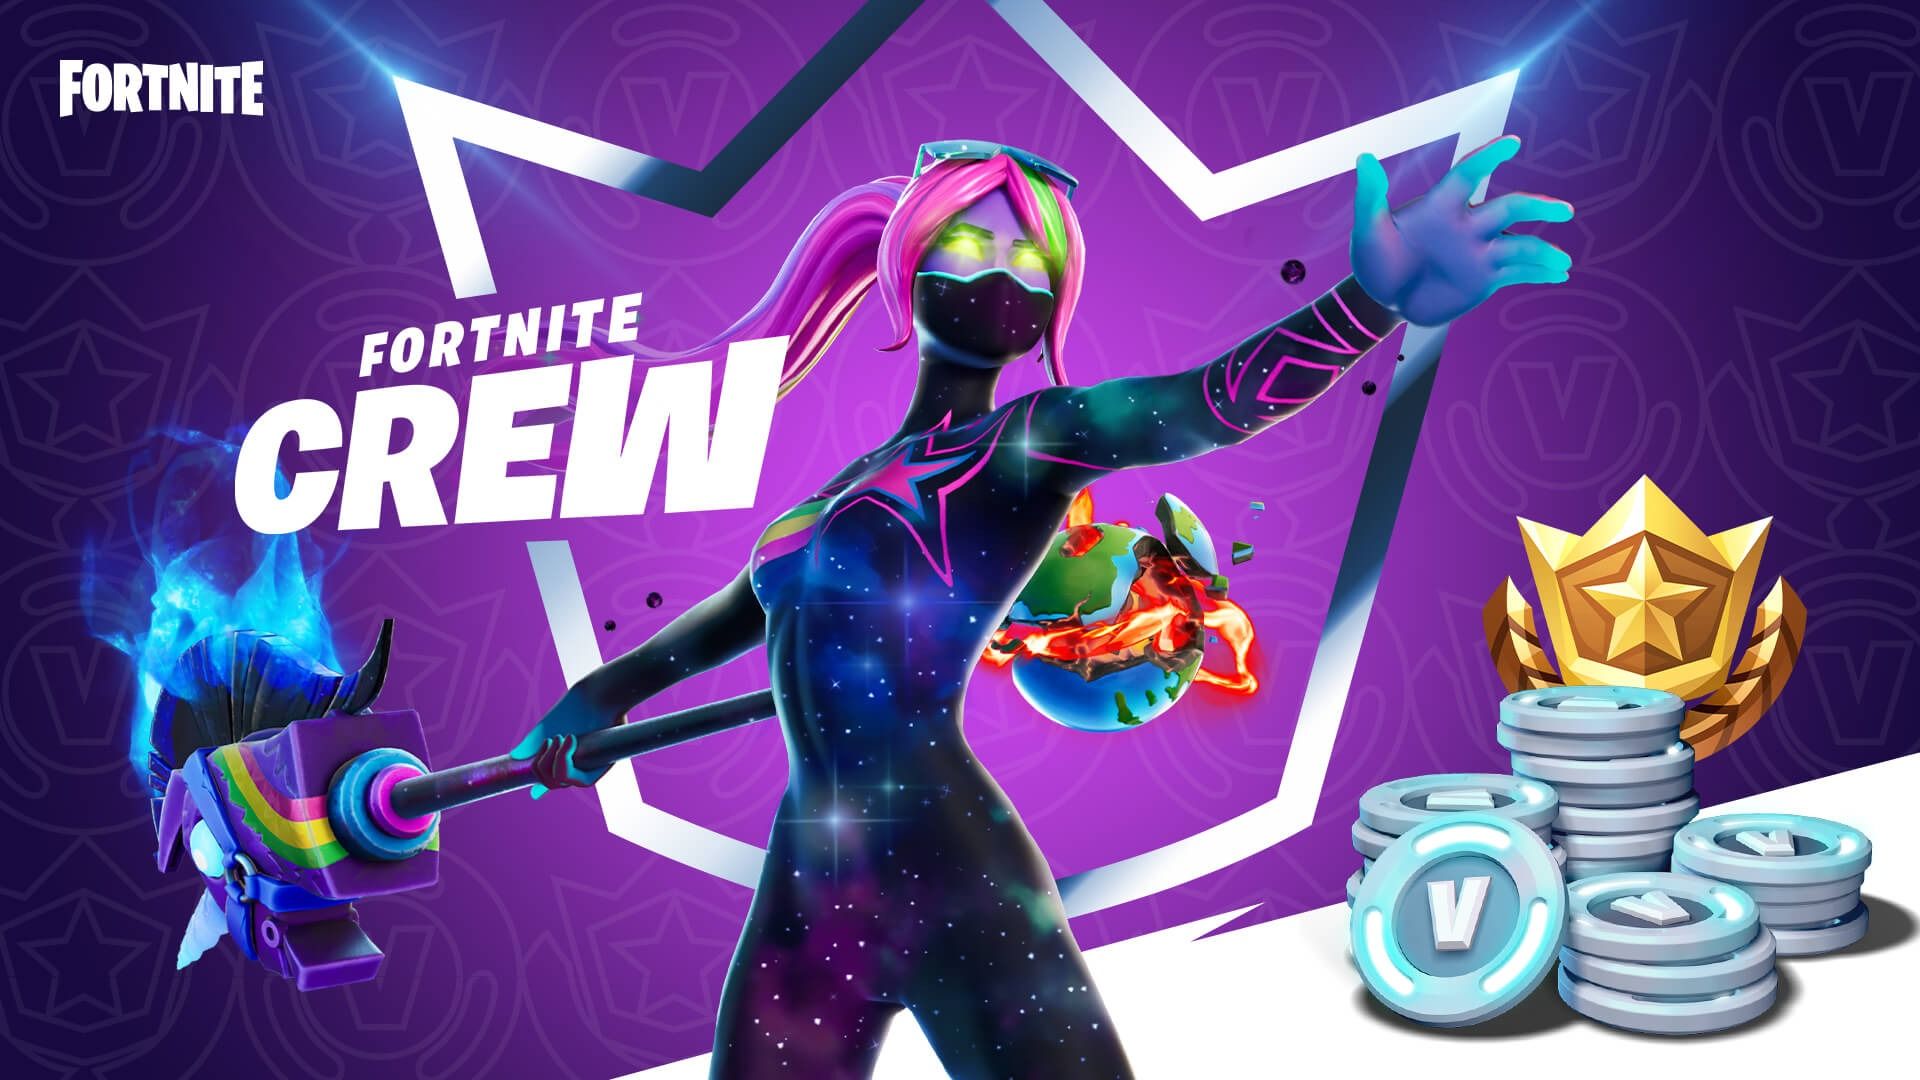 Fortnite Goes Galactic With Space Themed Skin For New Subscription Service Launch